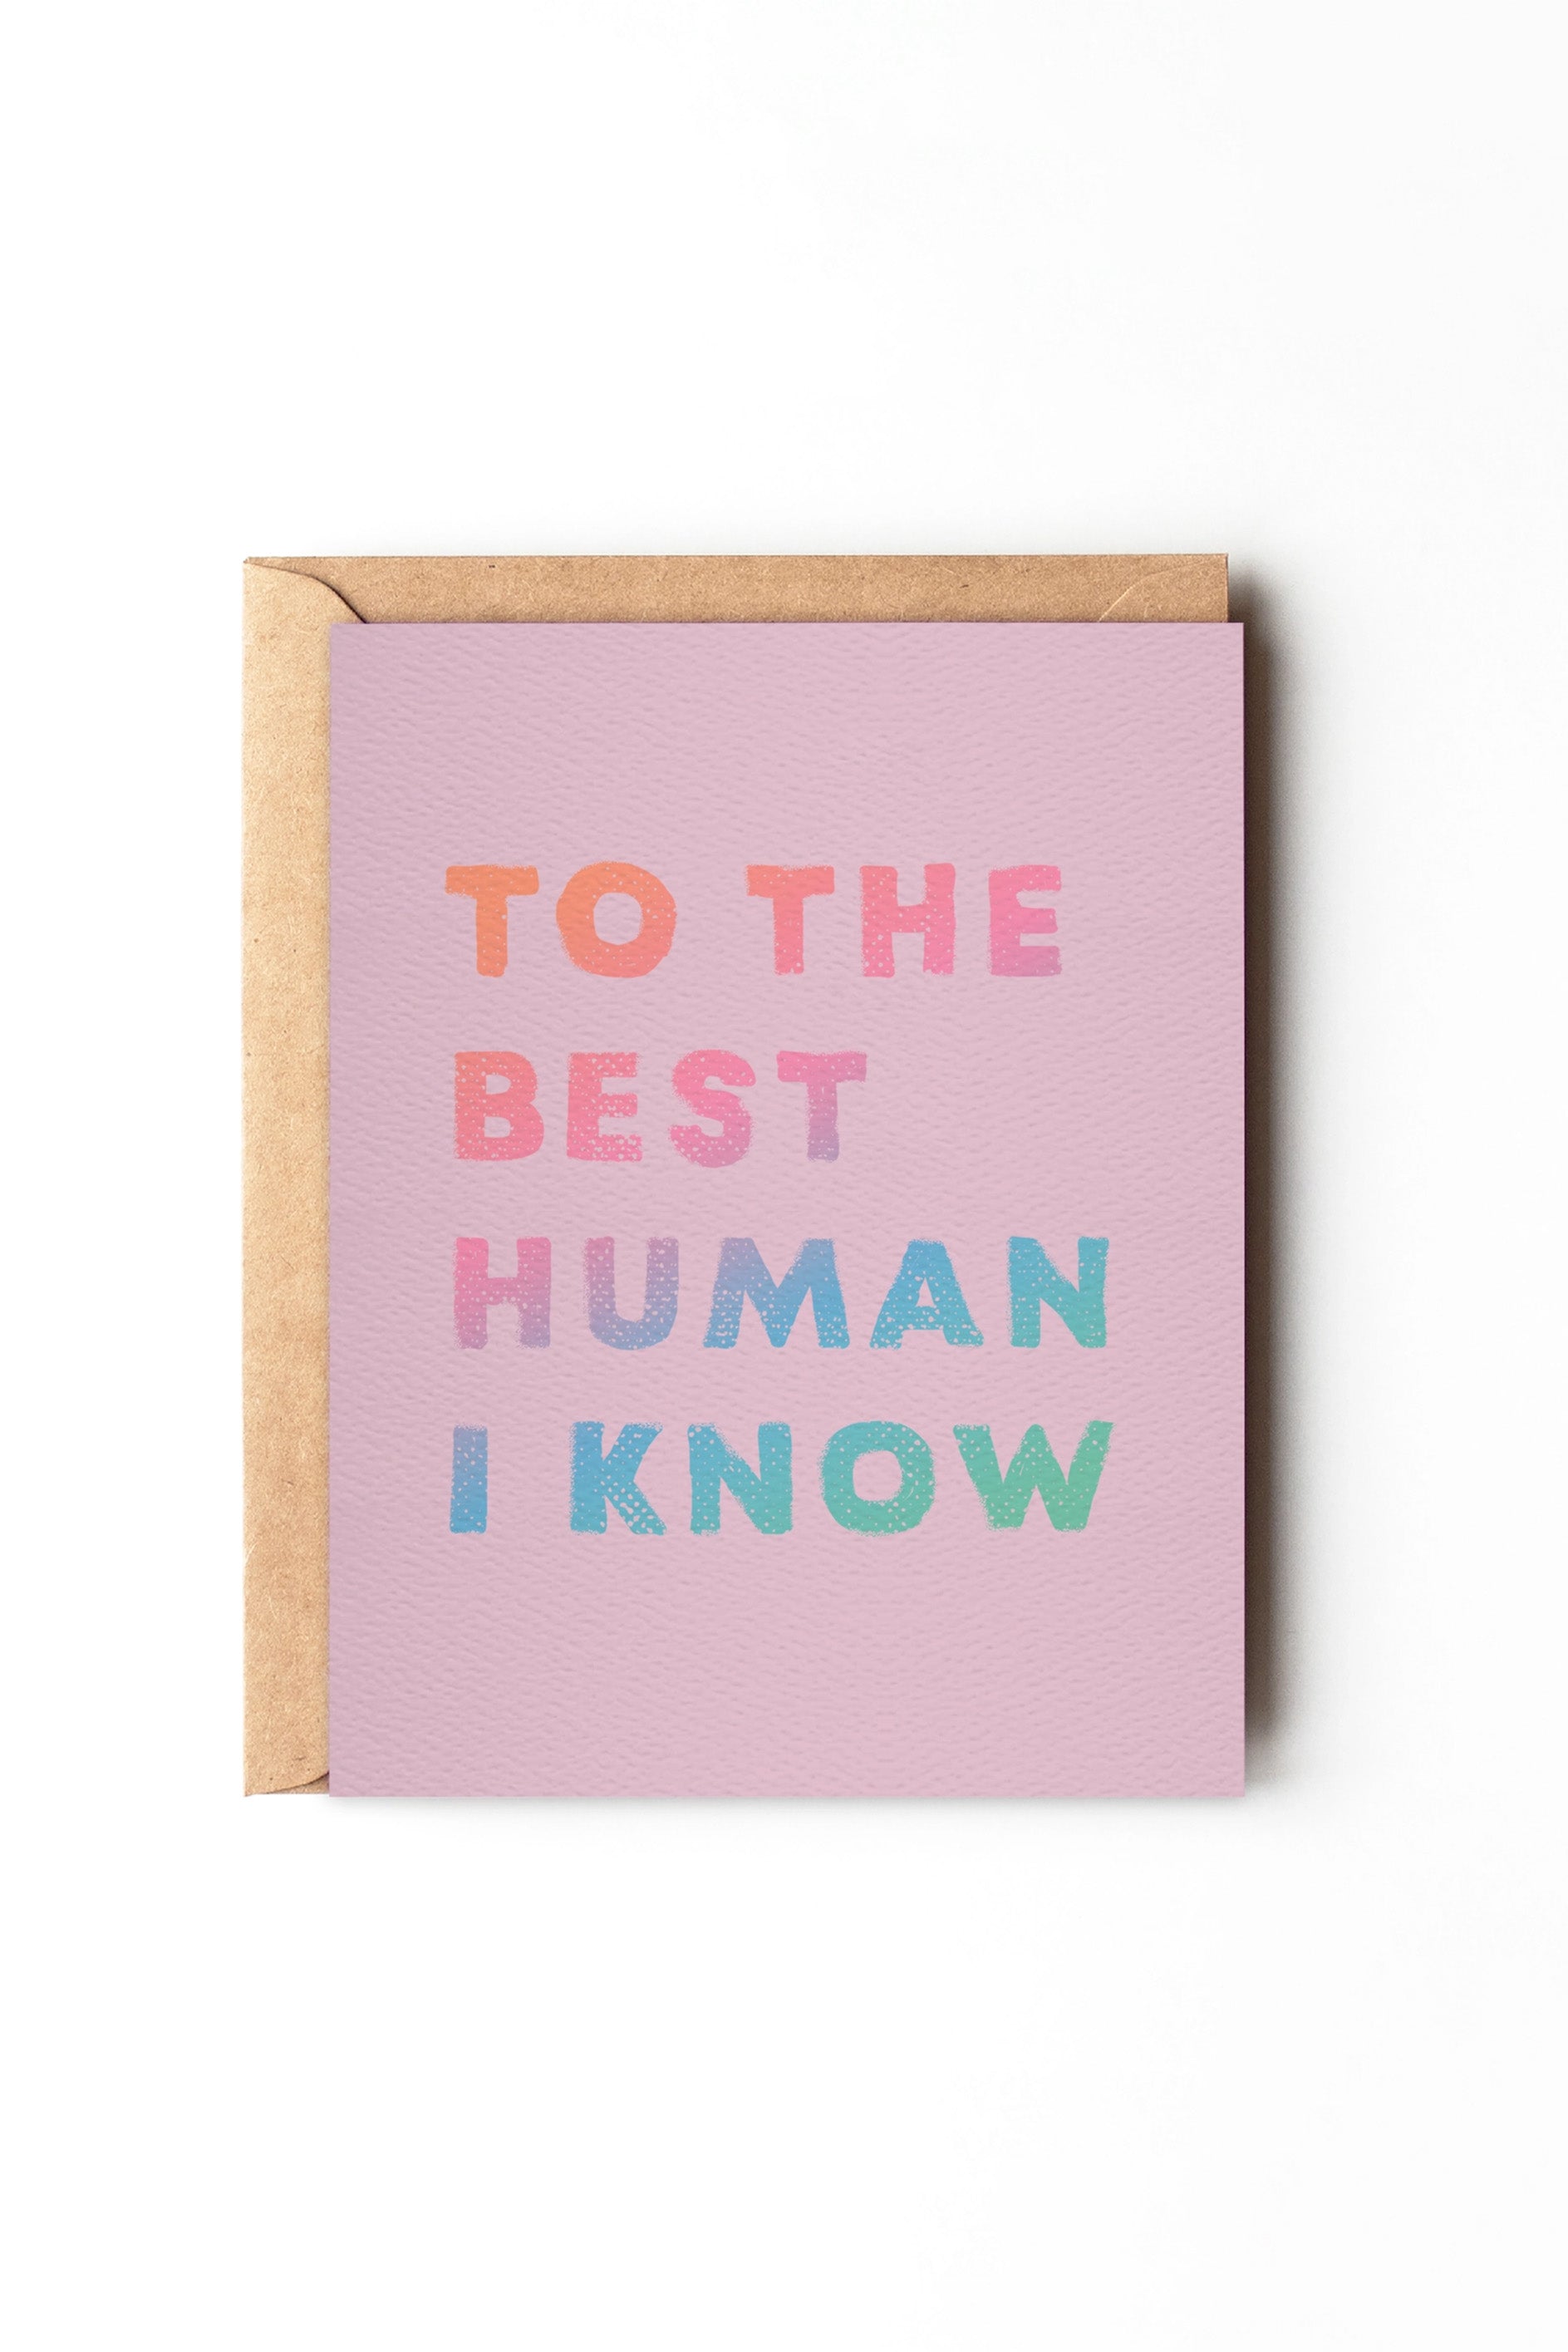 To the Best Human I Know - Purple Birthday Card - Greeting Card - The Green Brick Boutique